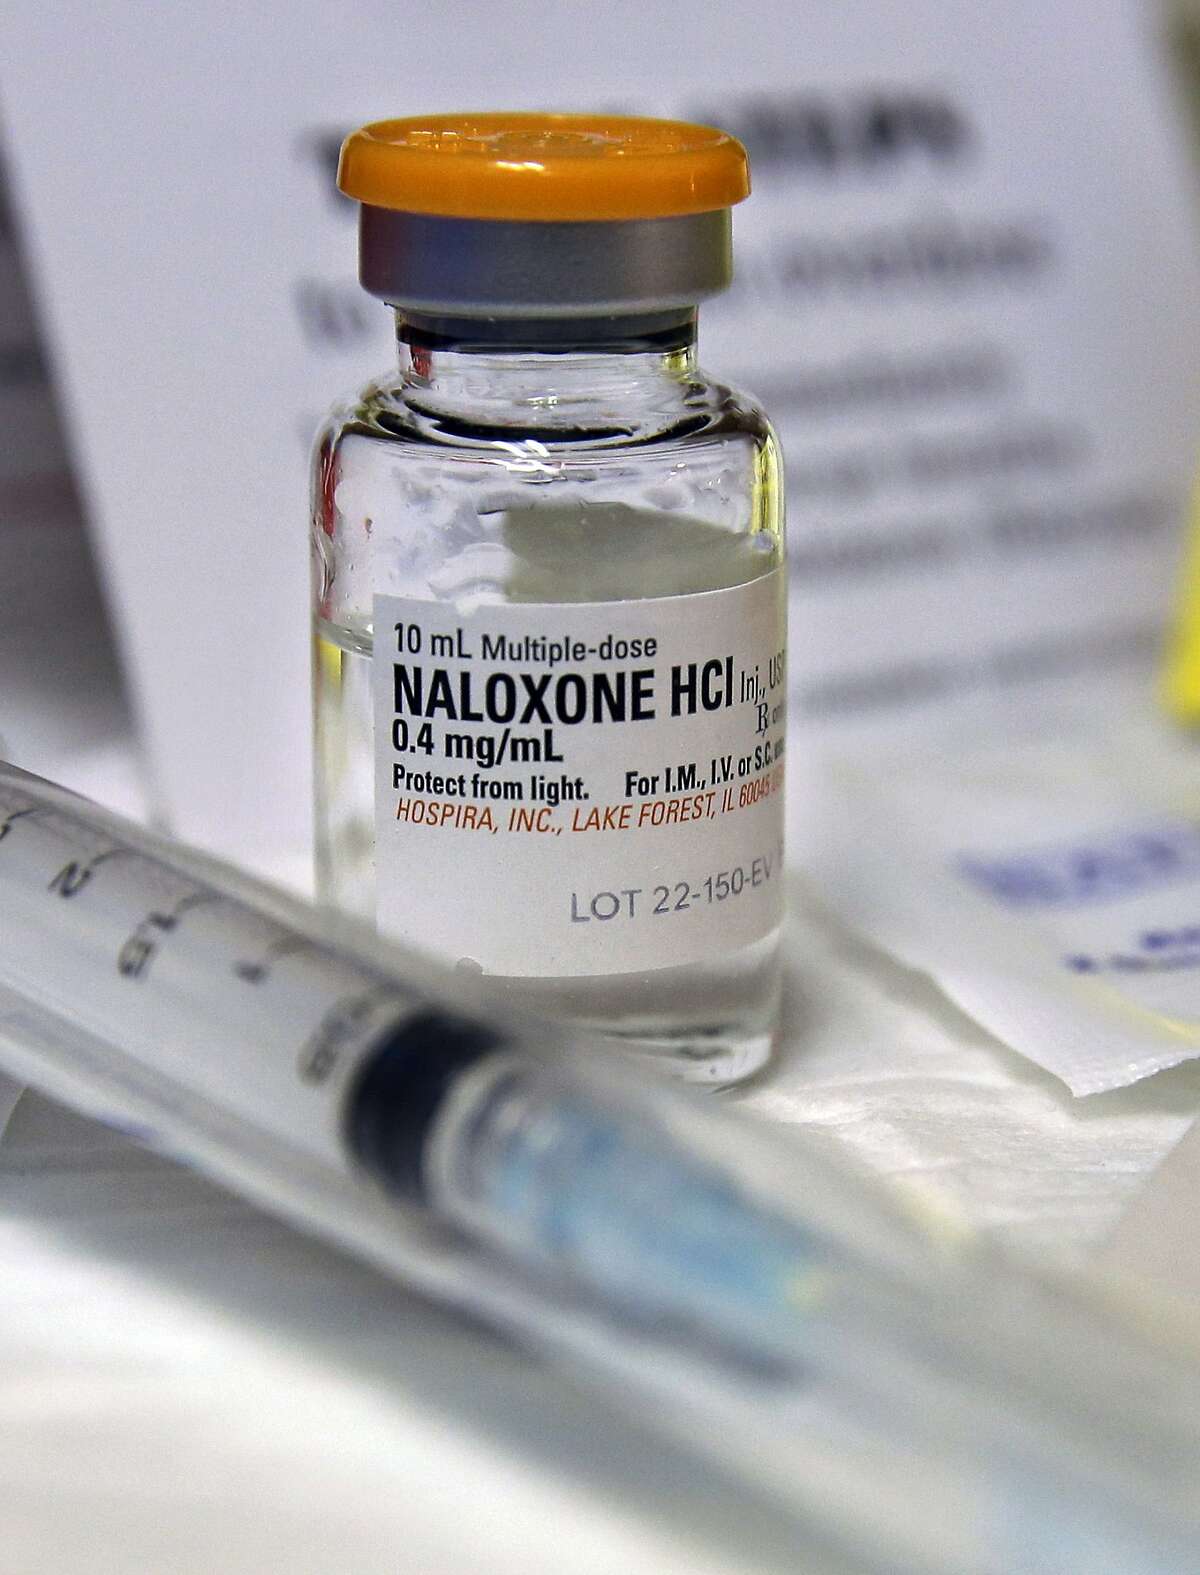 FILE- In this Wednesday, Feb. 19, 2014, file photograph, a small bottle of the opiate overdose treatment drug, naloxone, also known by its brand name Narcan, is displayed at the South Jersey AIDS Alliance in Atlantic City, N.J. It is becoming easier for friends and family of heroin users or patients abusing strong prescription painkillers to get access to naloxone, a powerful, life-saving antidote, as state lawmakers loosen restrictions on the medicine to fight a growing epidemic. (AP Photo/Mel Evans, File)